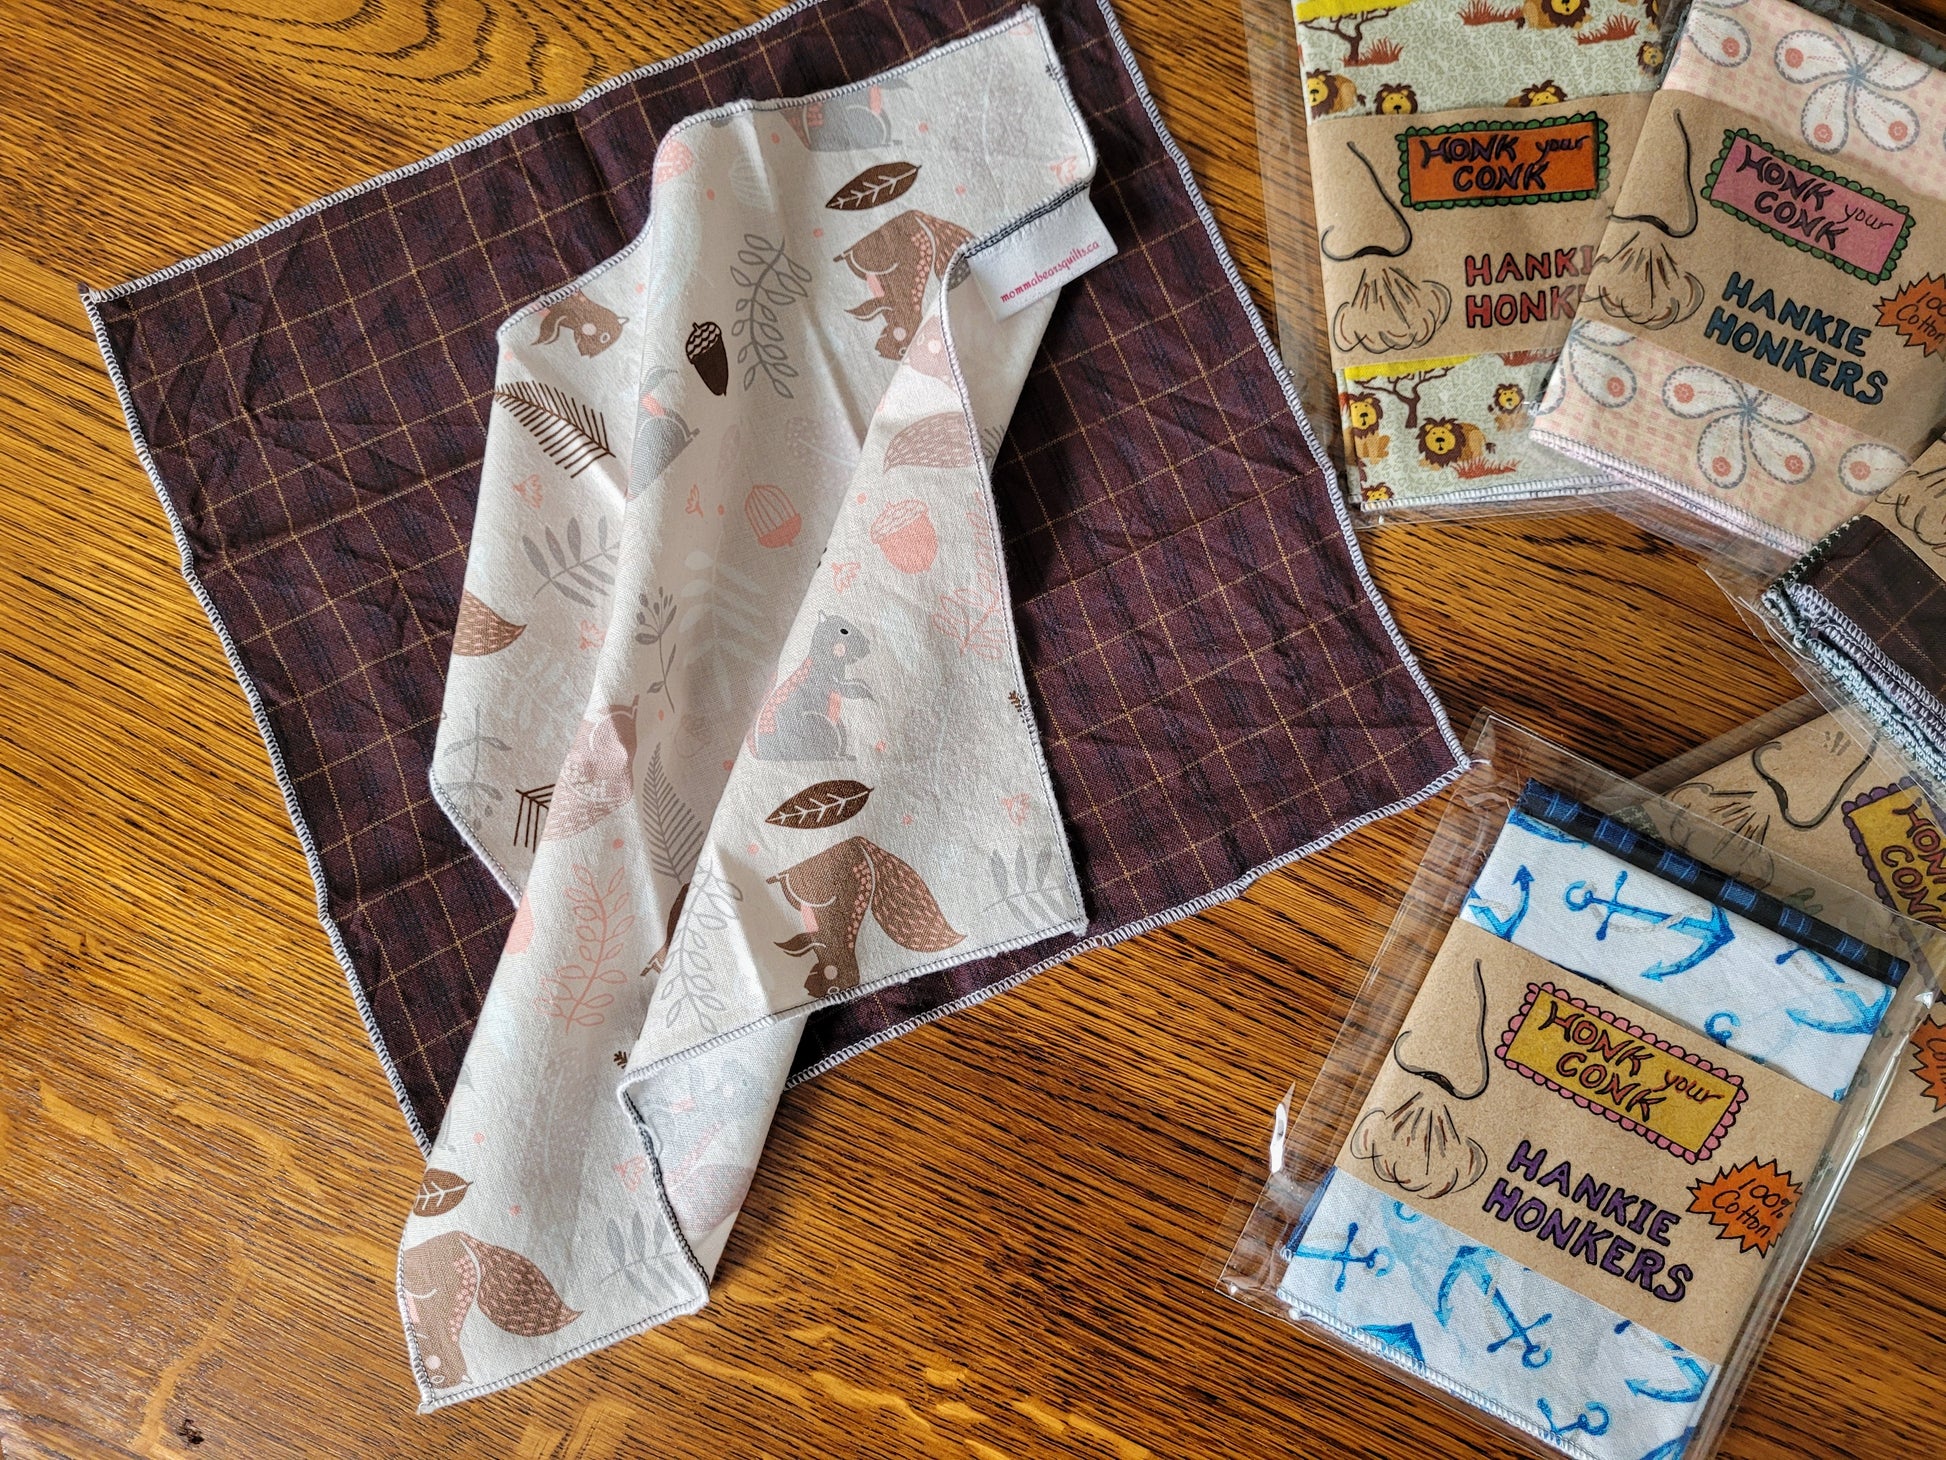 cotton hankerchiefs come in a variety of prints